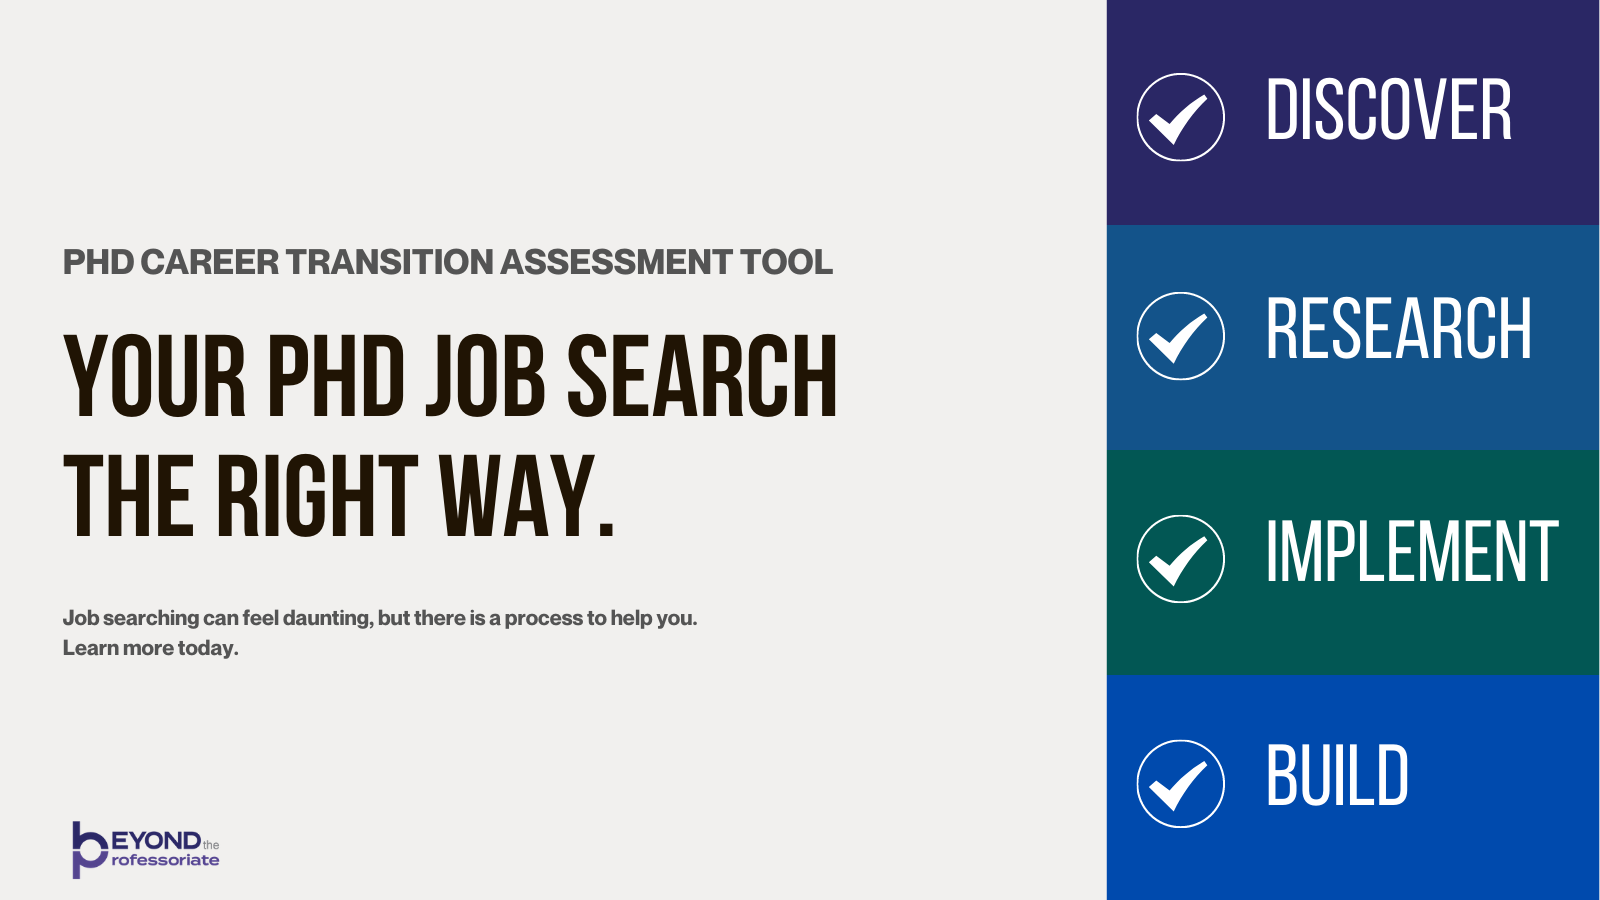 Your PhD Job Search the Right Way: Discover, Research, Implement, Build.